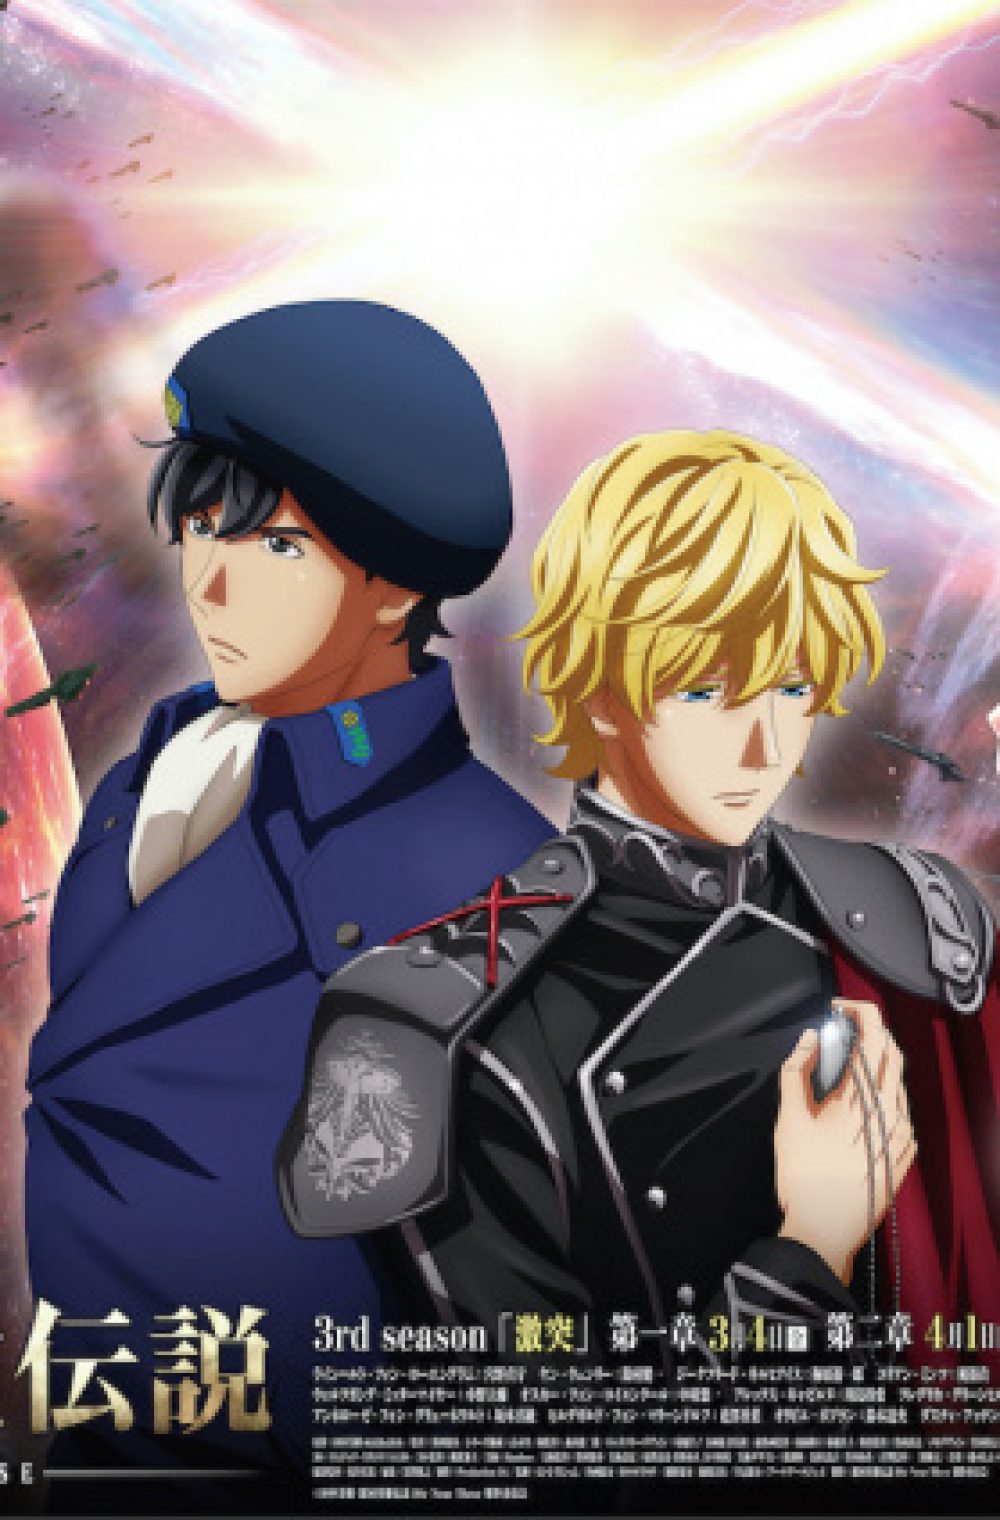 The Legend of the Galactic Heroes: The New Thesis Season 3 – Clash